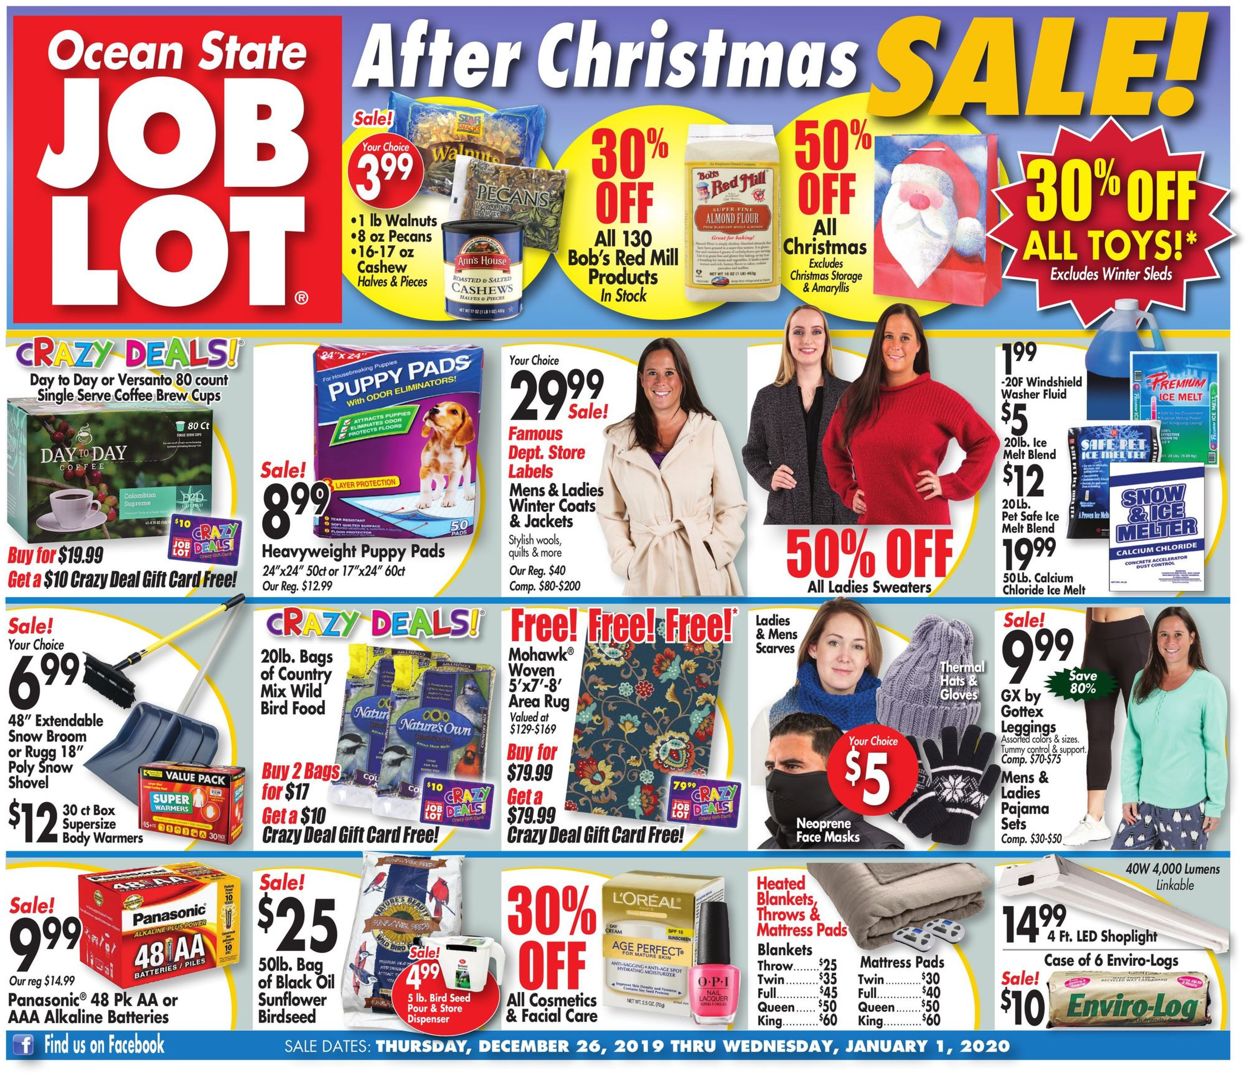 Ocean State Job Lot - After Christmas Sale 2019 Weekly Ad Circular - valid 12/26-01/01/2020